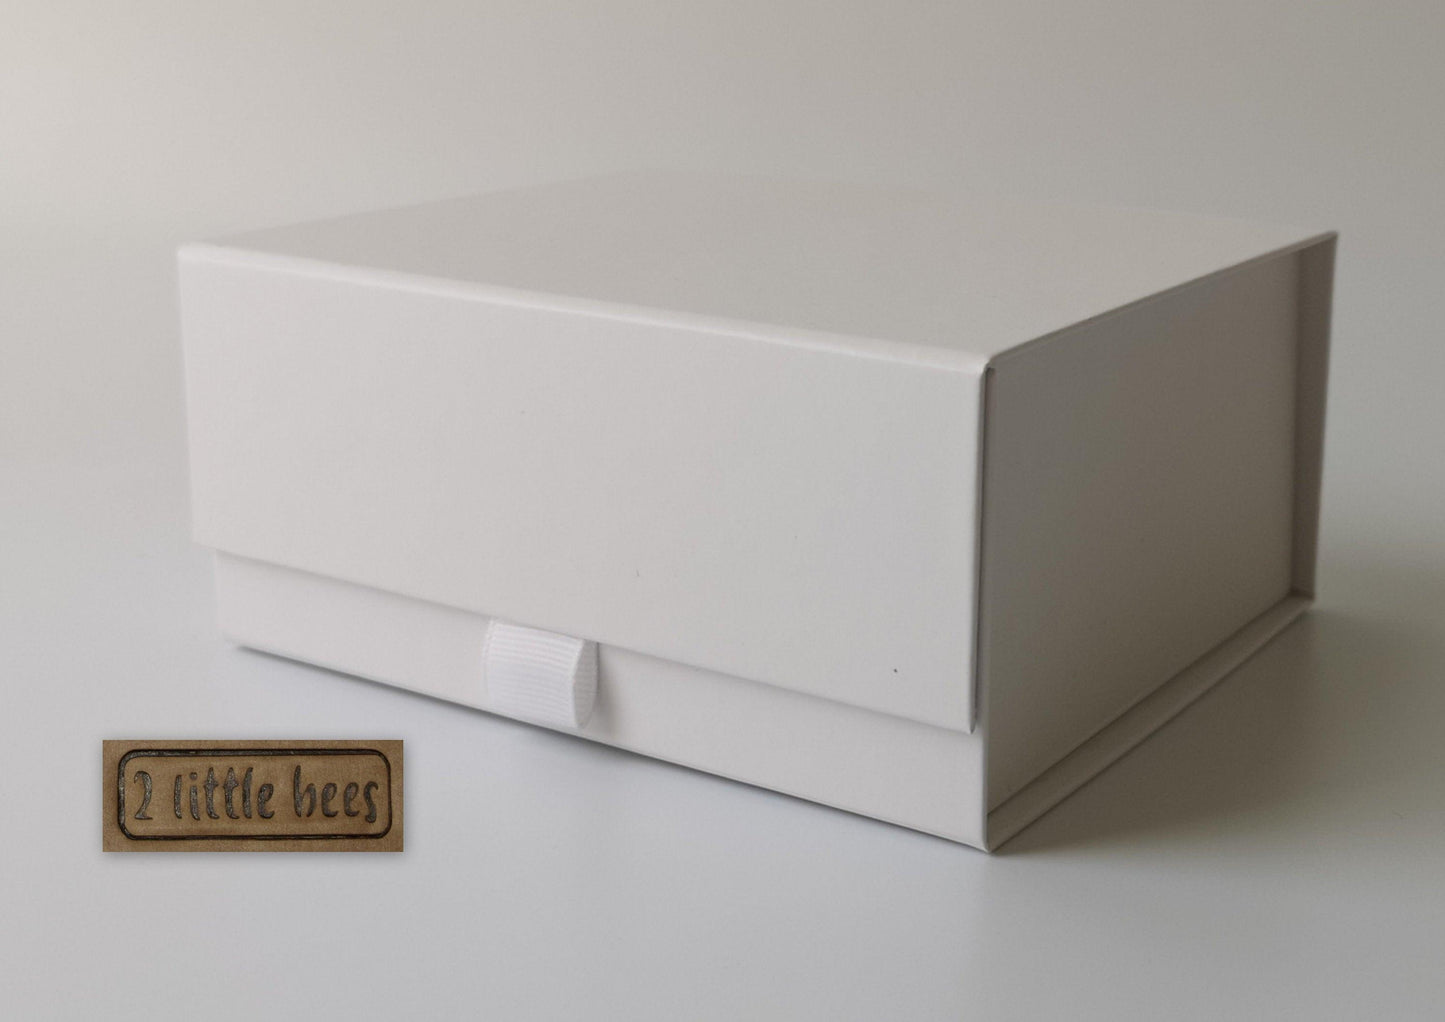 White magnetic gift boxes. Small & Medium. - 2 little bees